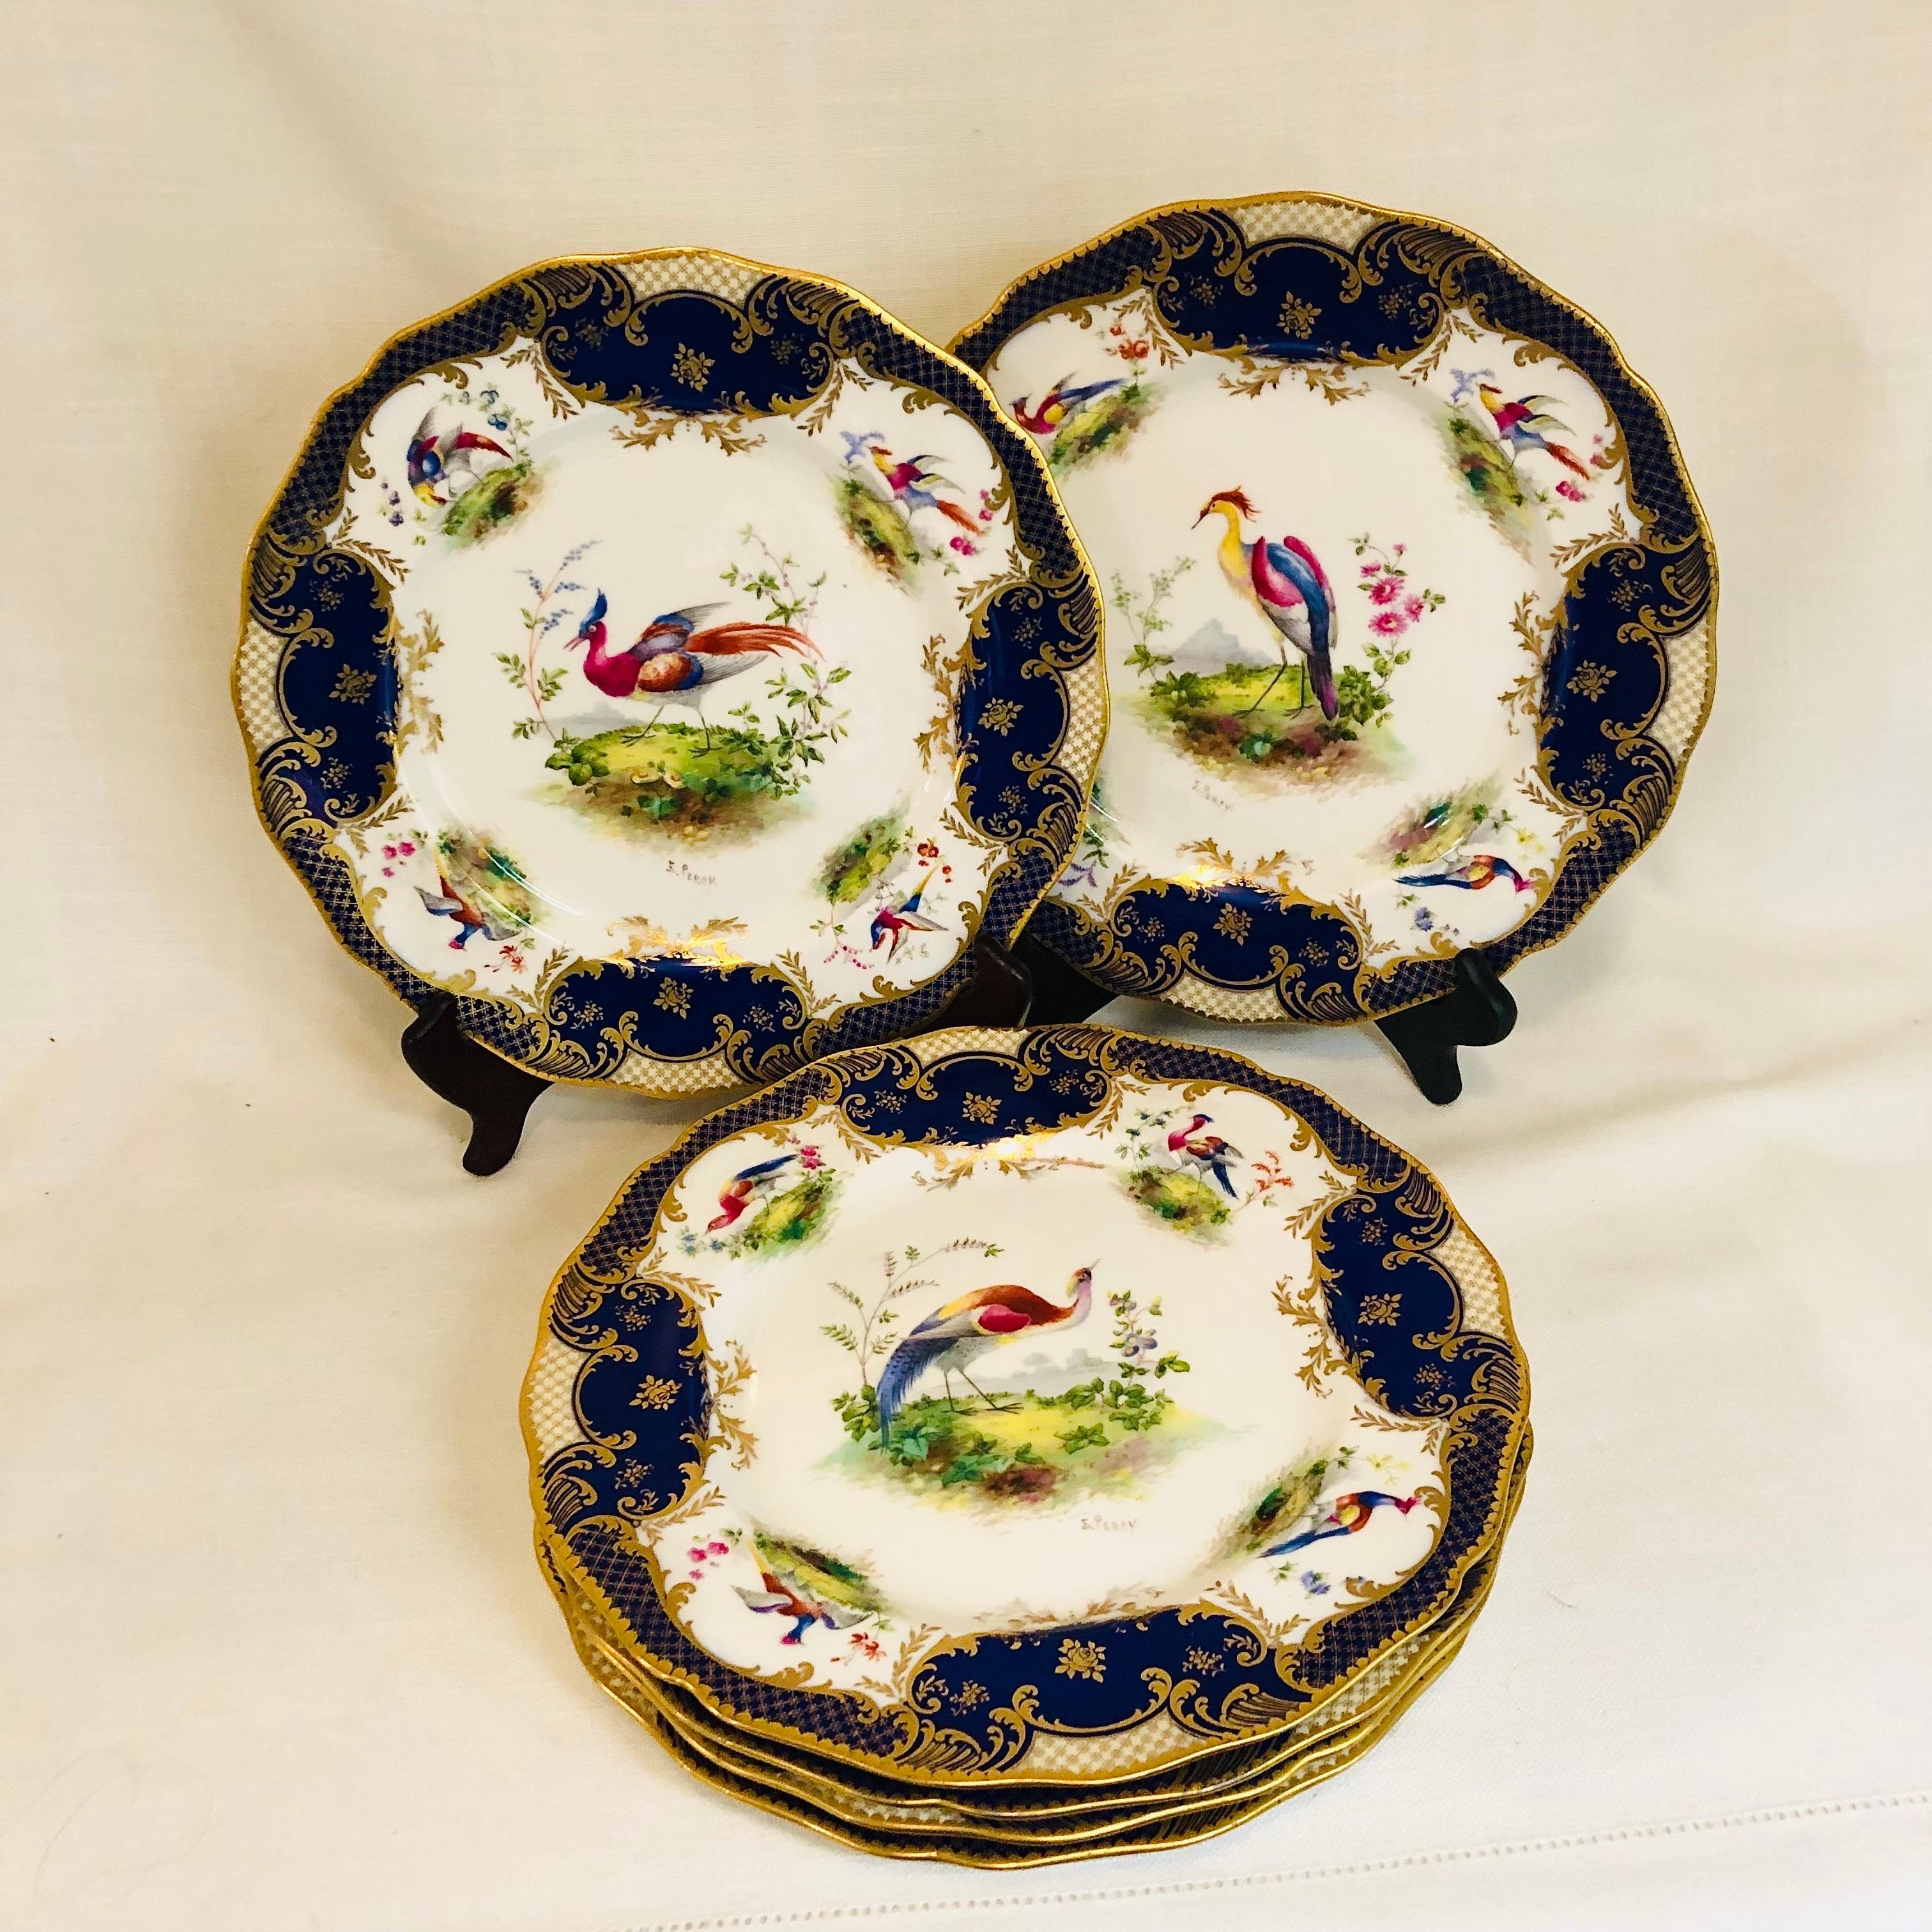 Set of 6 Cobalt Royal Doulton Made for Tiffany Dinner Plates with Exotic Birds 3